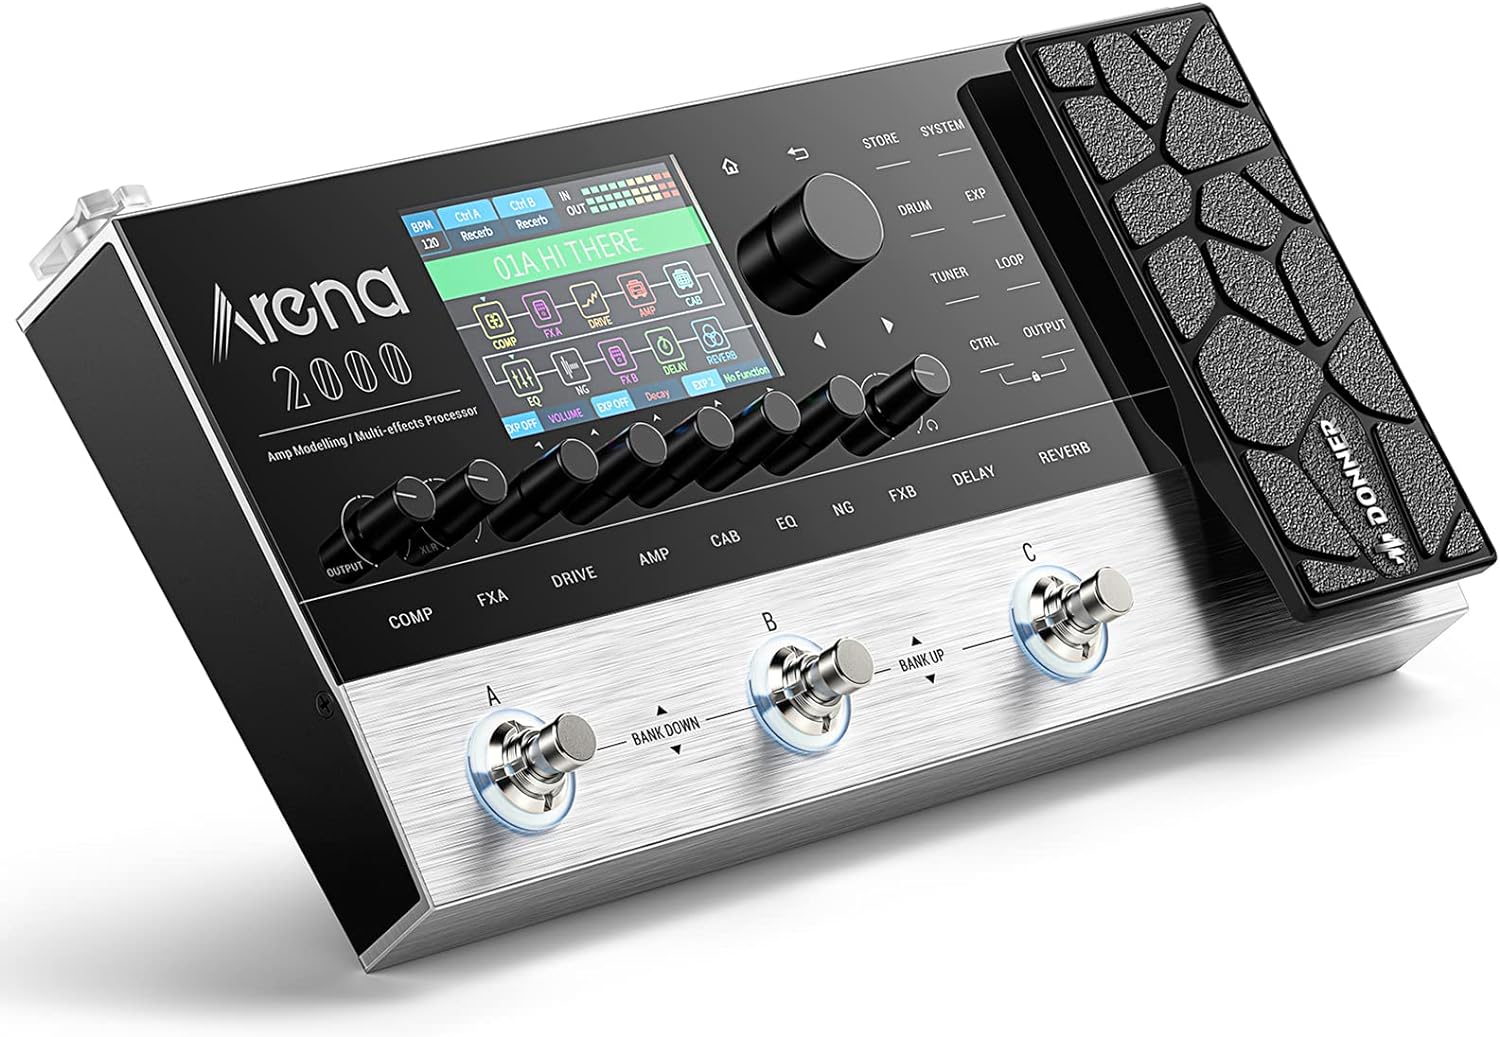 Donner Multi Effects Pedal, Arena 2000 Multieffects Processors Guitar Pedals with 278 Effects, 100 IRs, Looper, Drum Machine, Amp Modeling, Support XLR, MIDI IN